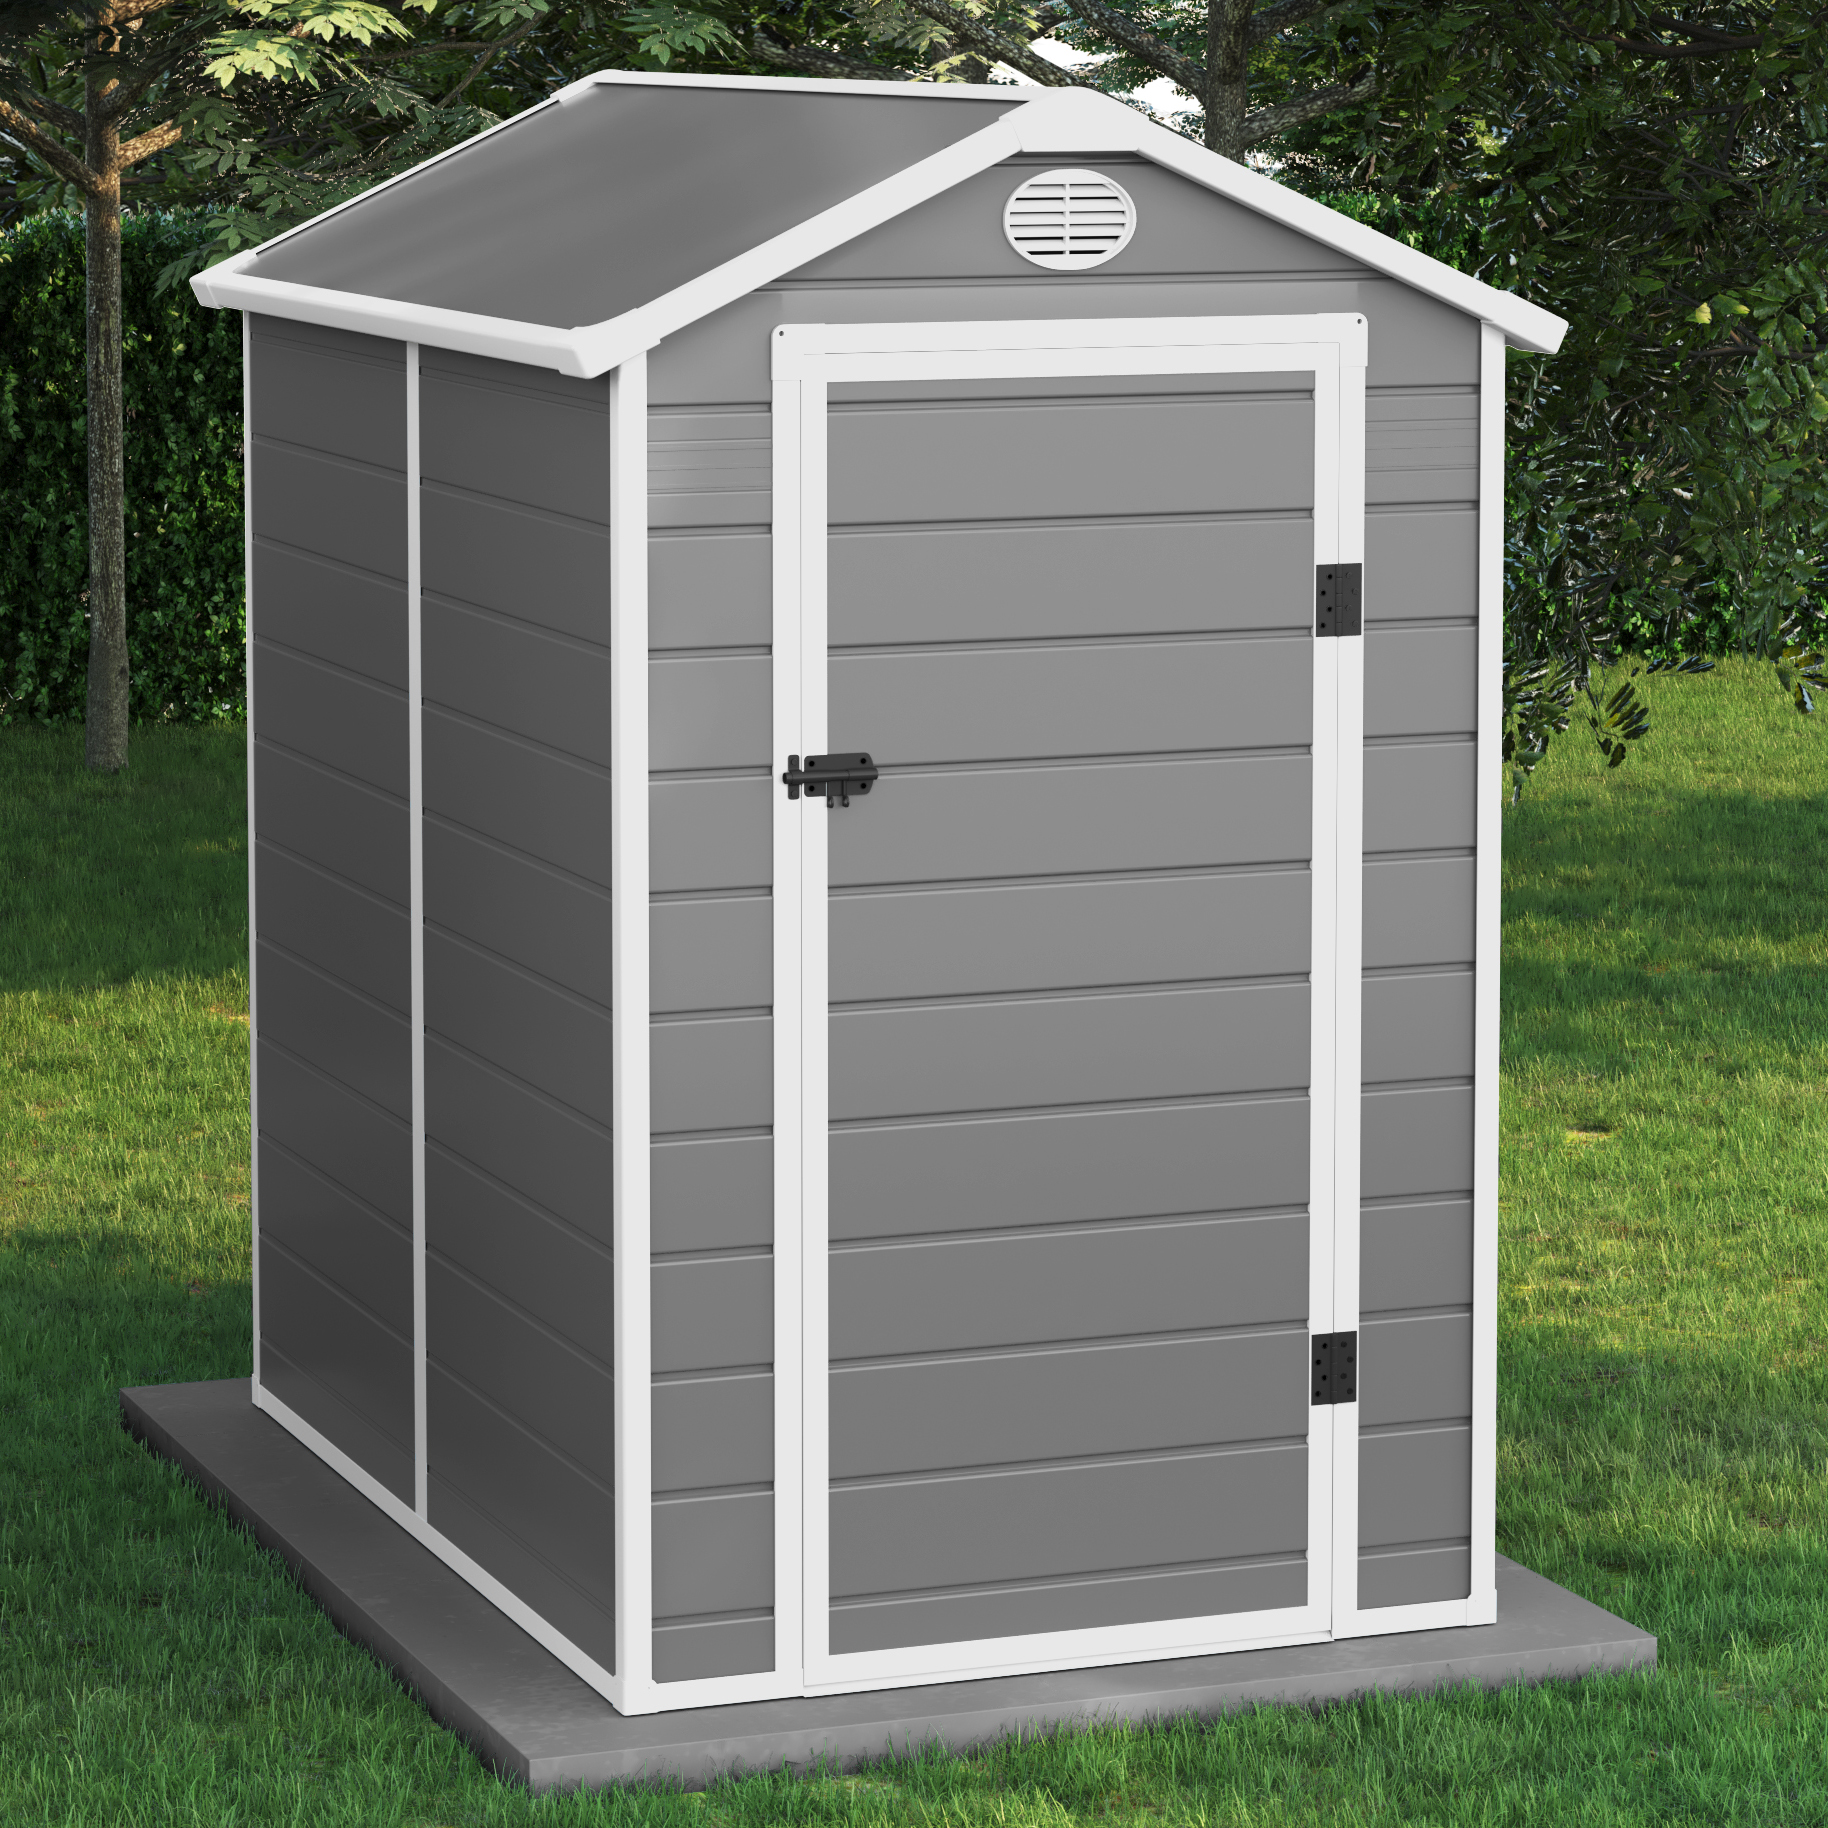 Billyoh Kingston Apex Plastic Shed Light Grey With Floor 4x3 Grey